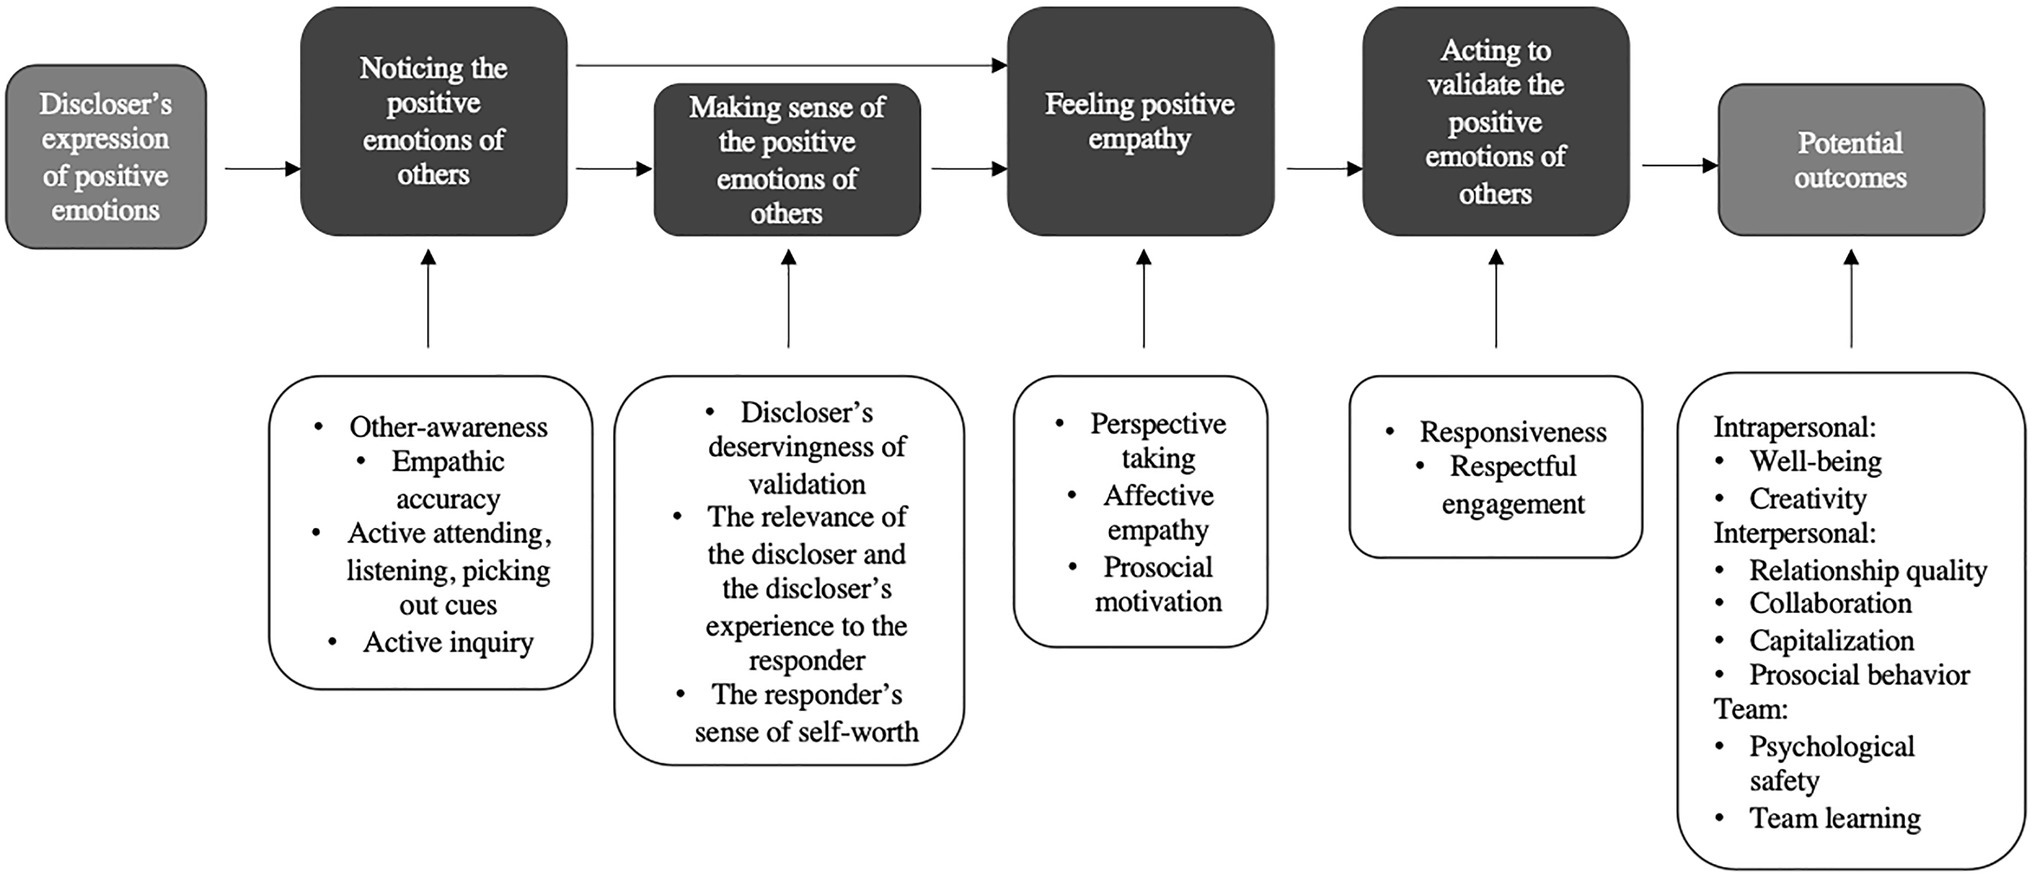 beton pianist Afsky Frontiers | Responding to Positive Emotions at Work – The Four Steps and  Potential Benefits of a Validating Response to Coworkers' Positive  Experiences | Psychology